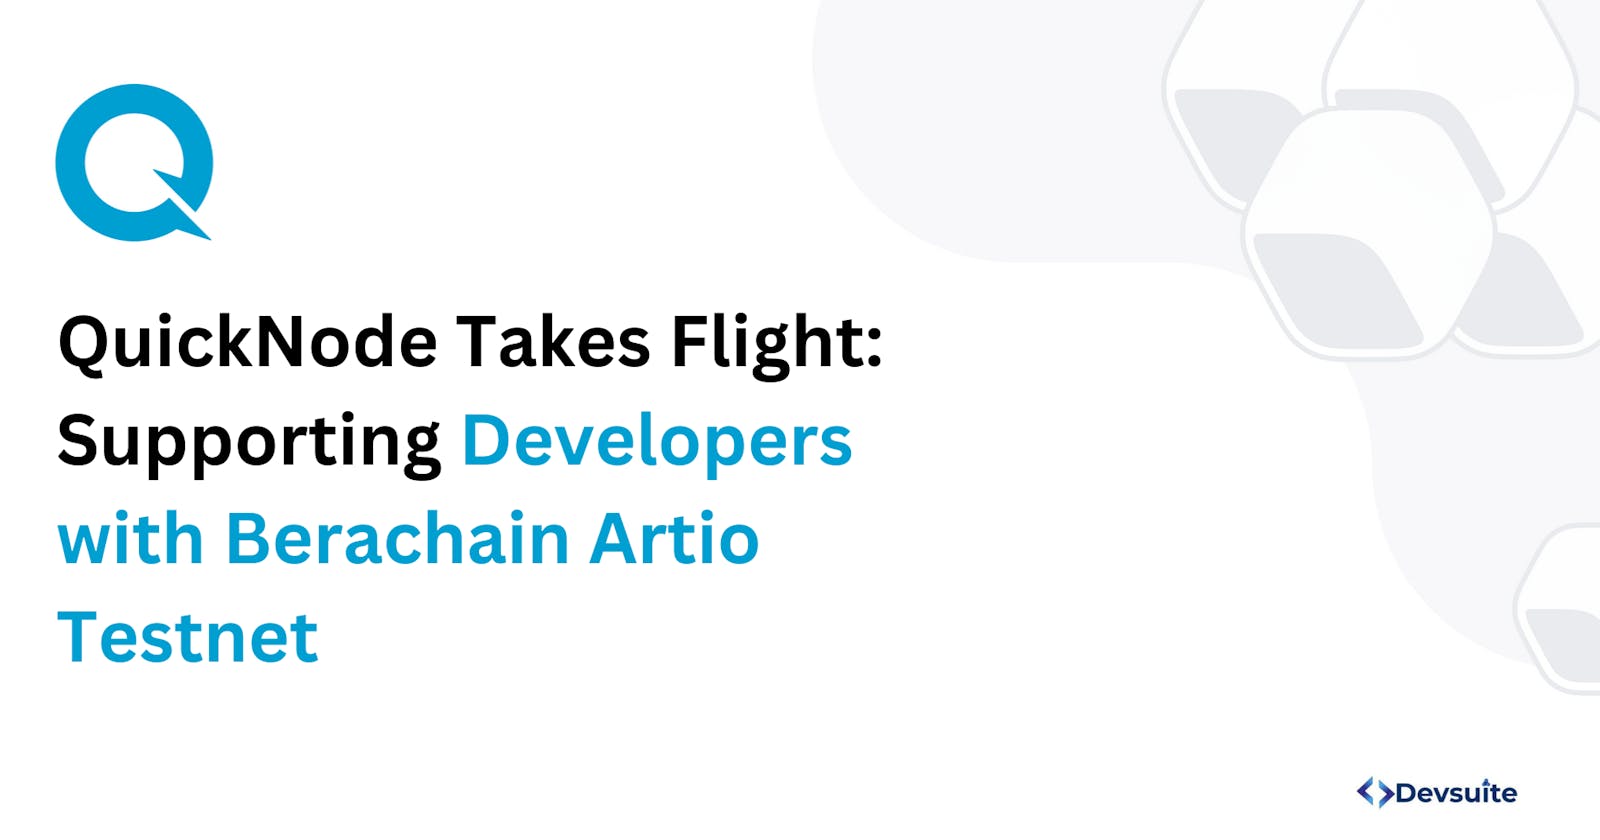 QuickNode Takes Flight: Supporting Developers with Berachain Artio Testnet